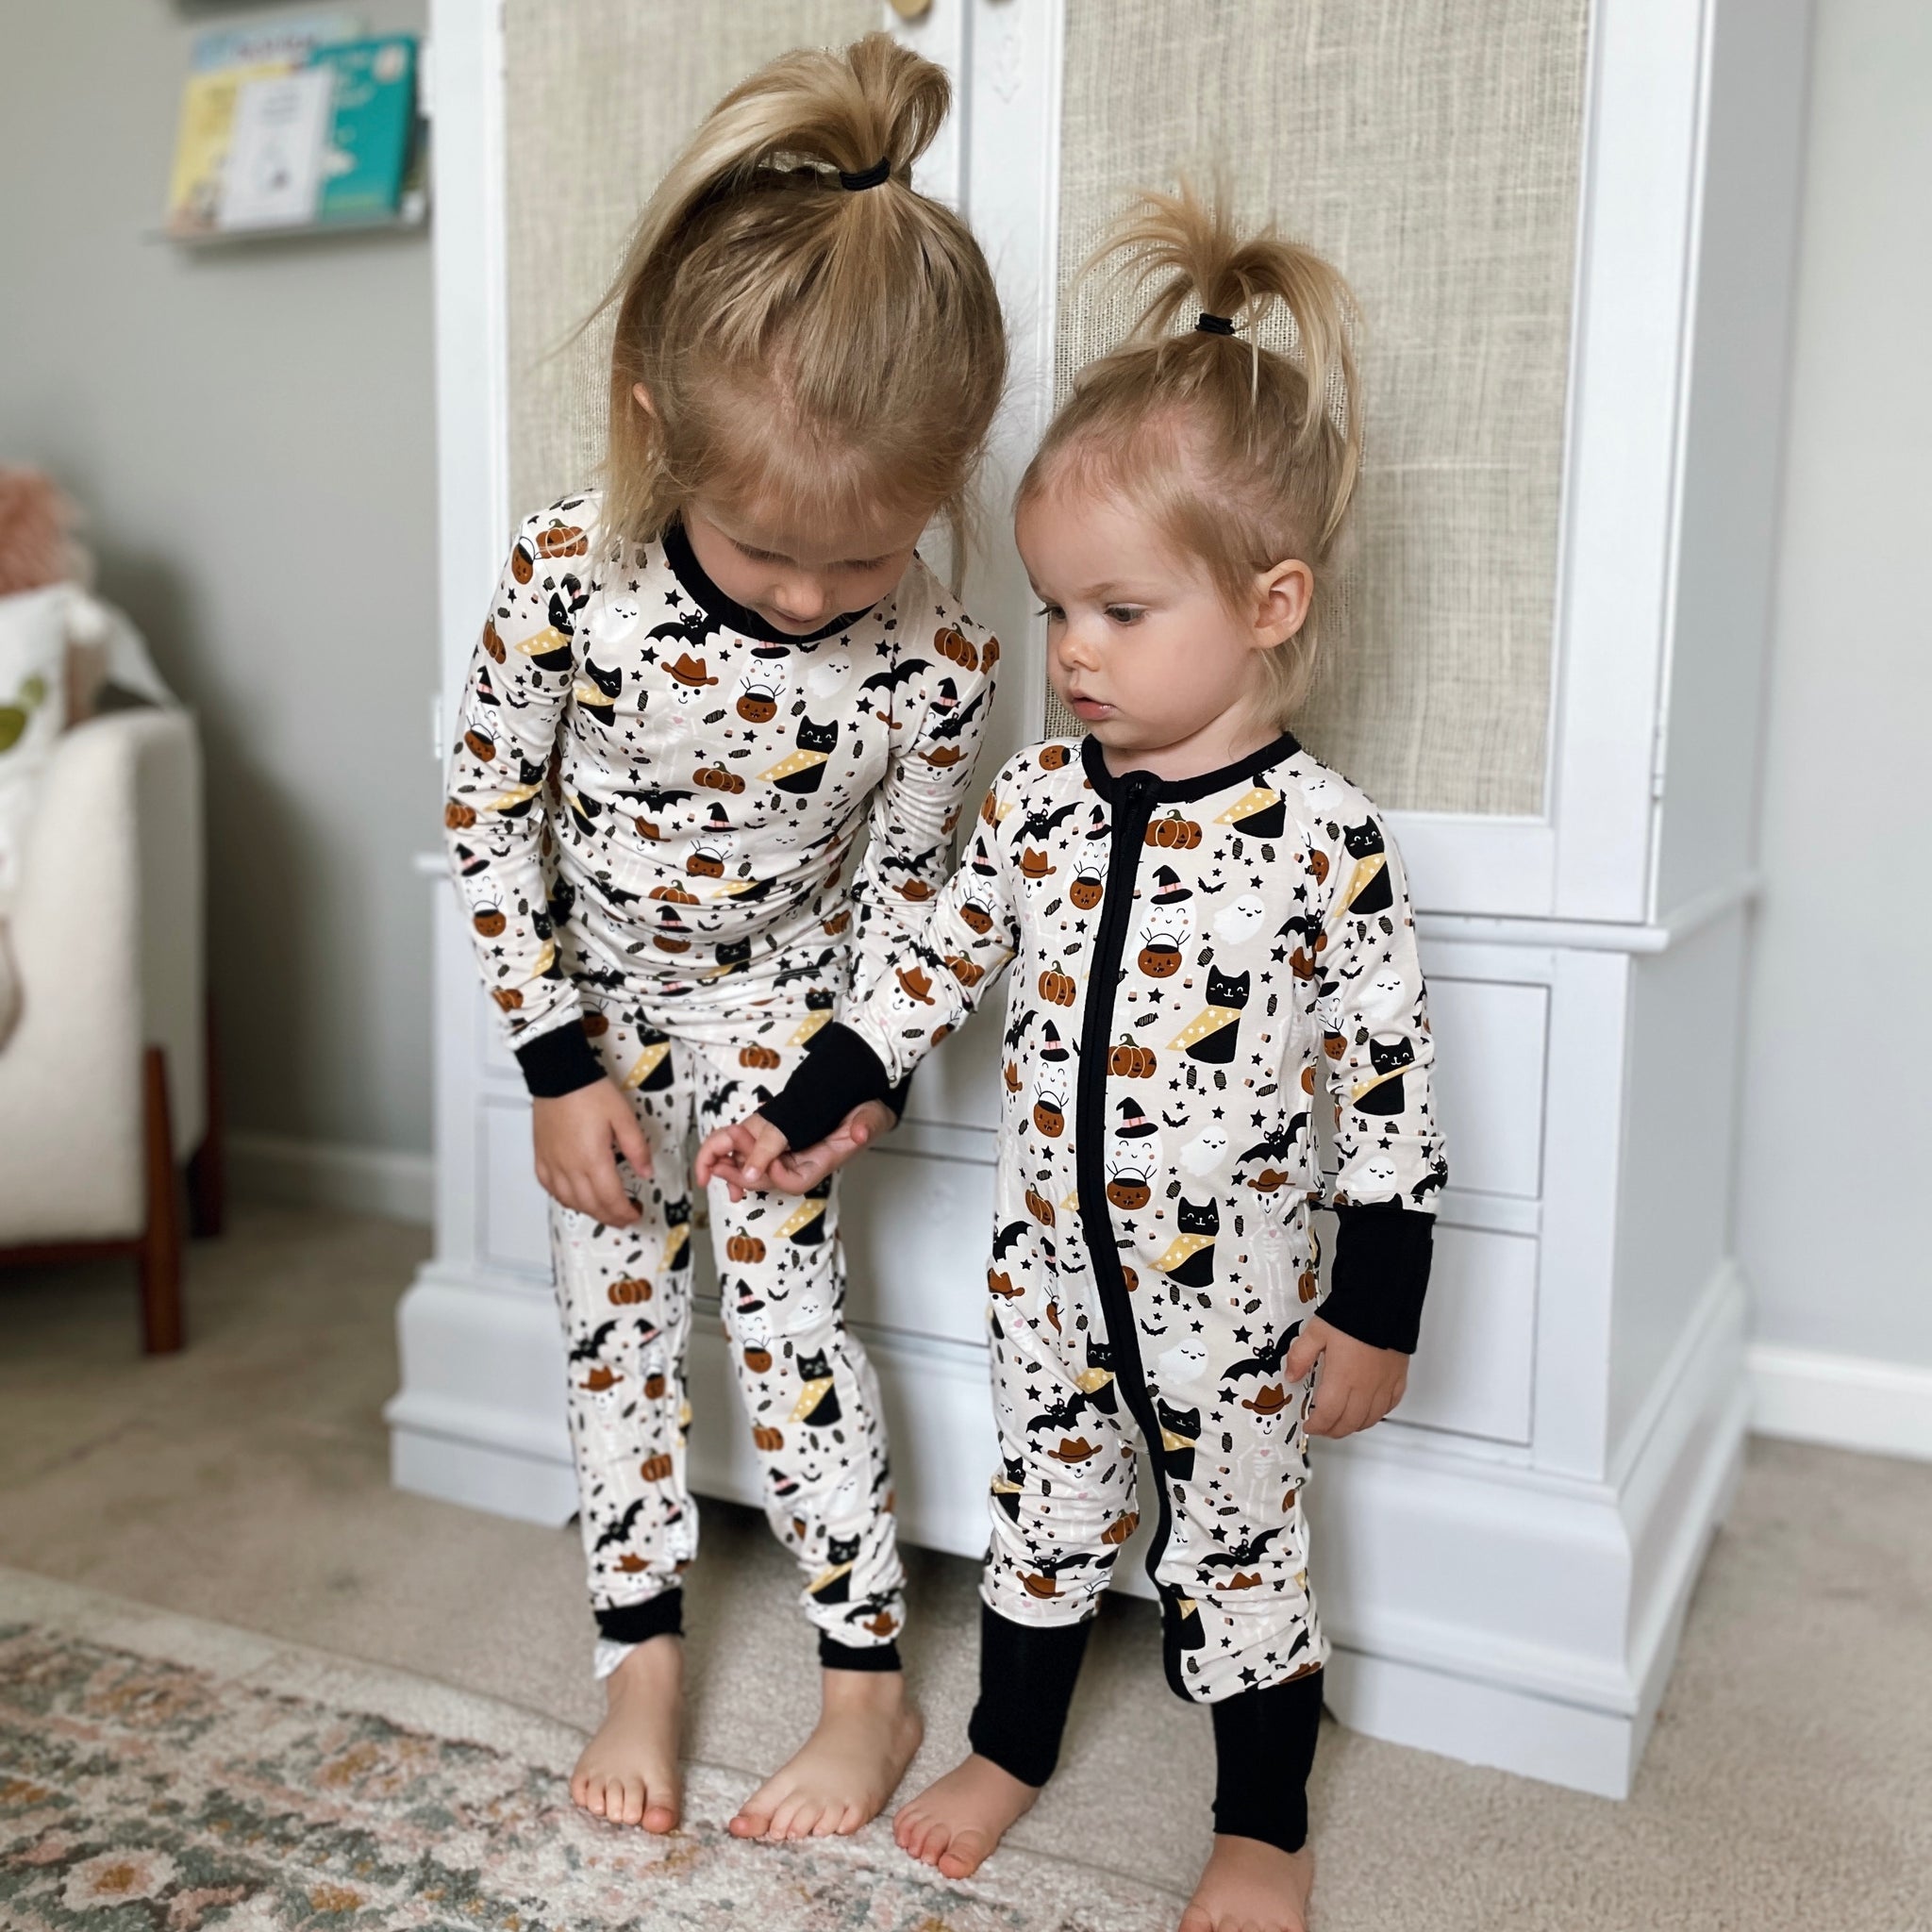 The Cutest Halloween Pajamas for Babies and Kids - Baby Chick